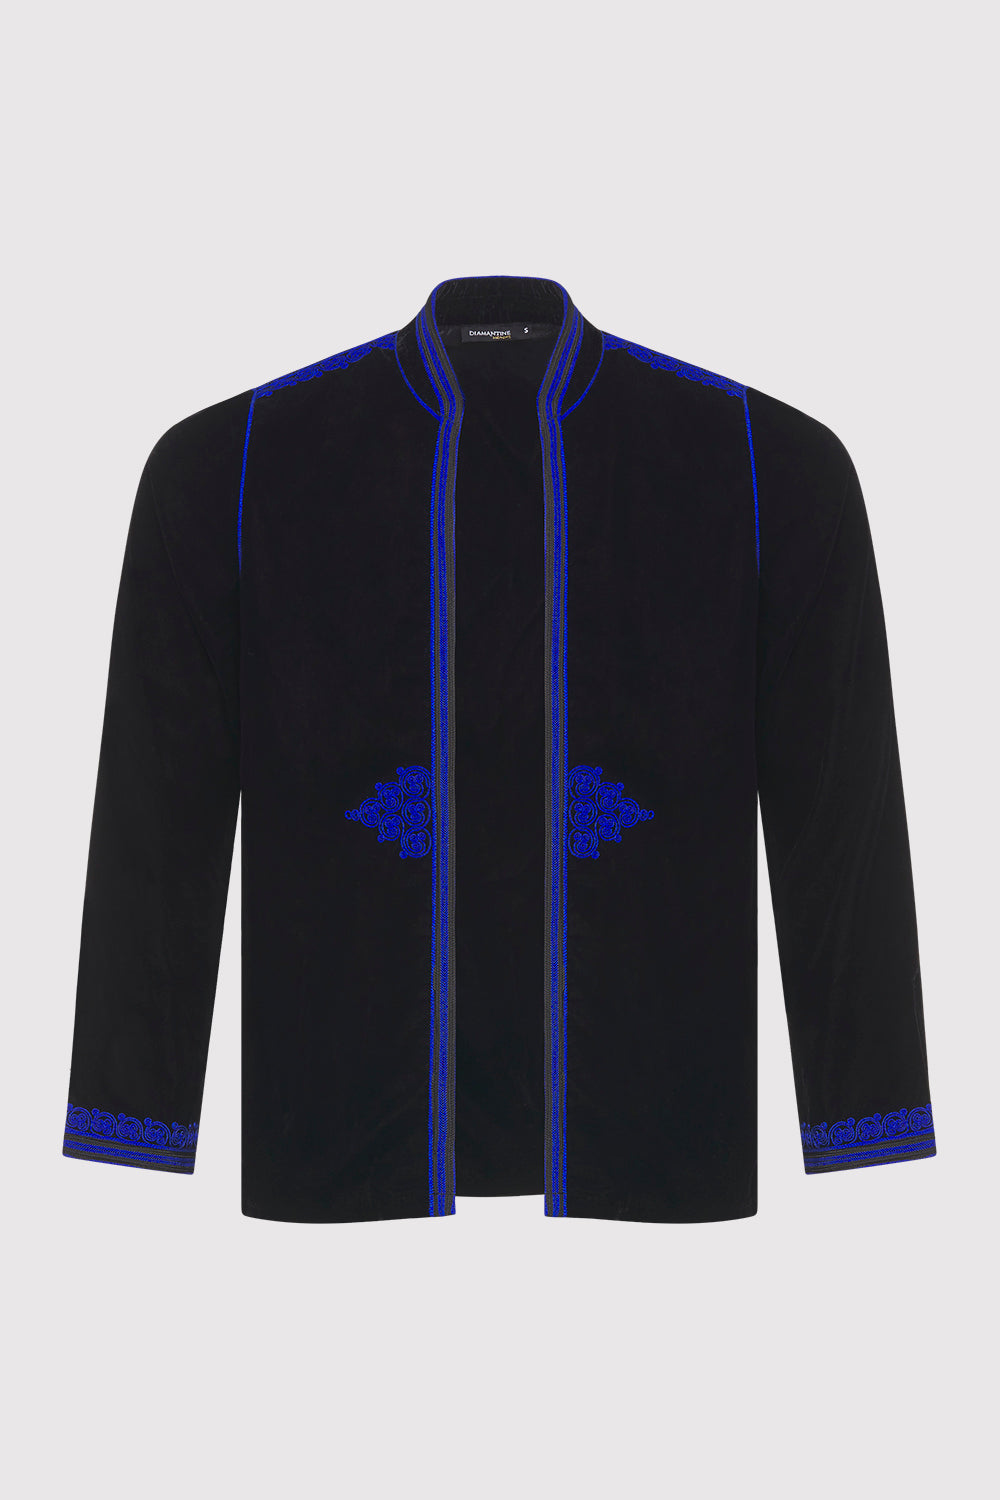 Gondole Velour Embroidered Long Sleeve Jacket in Black and Blue